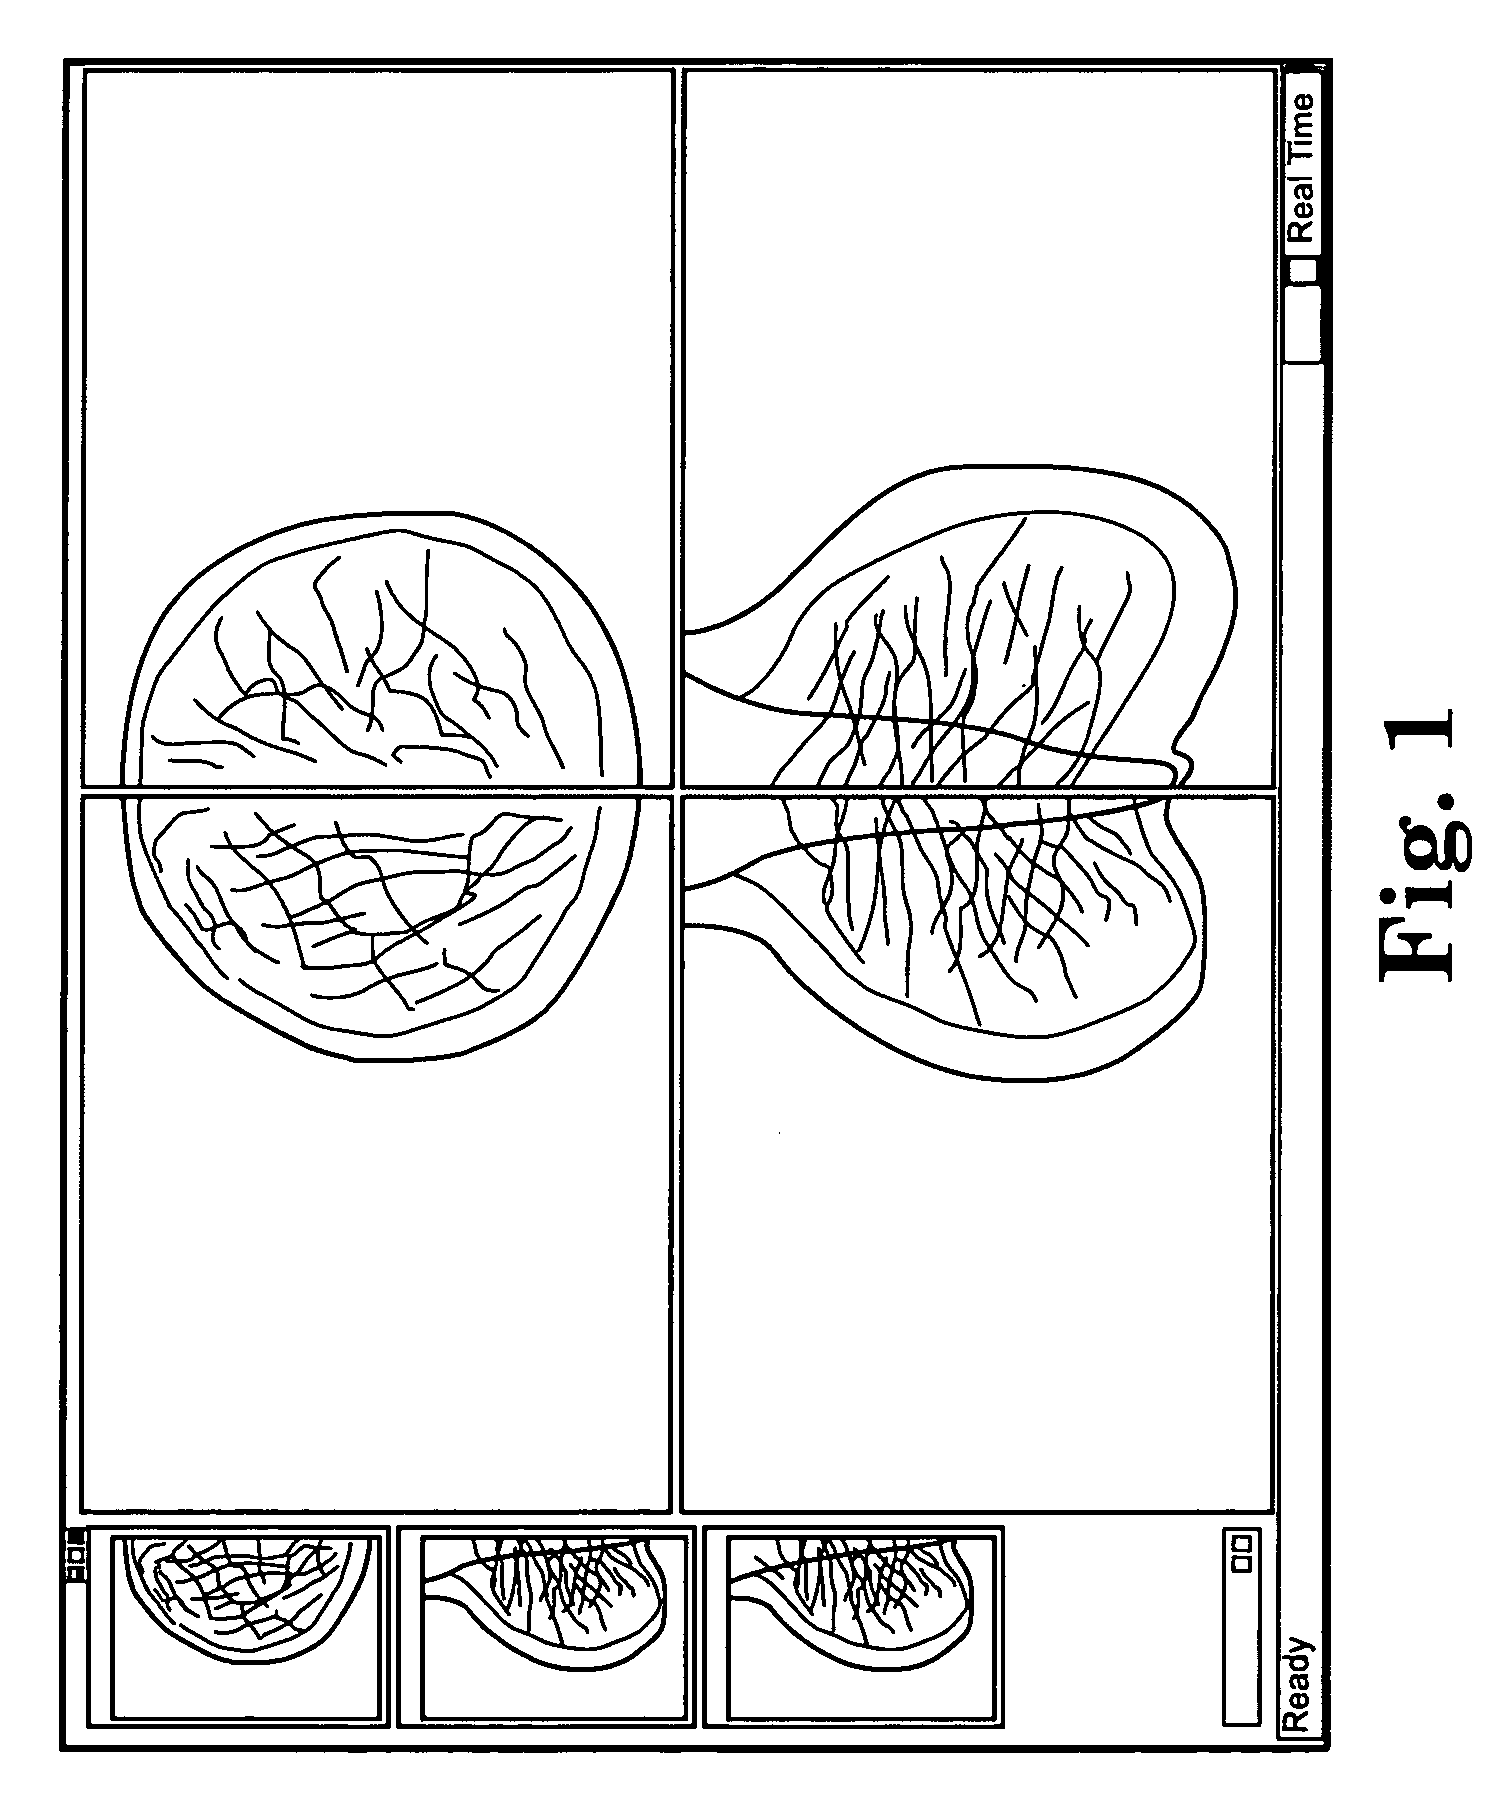 Mammography operational management system and method